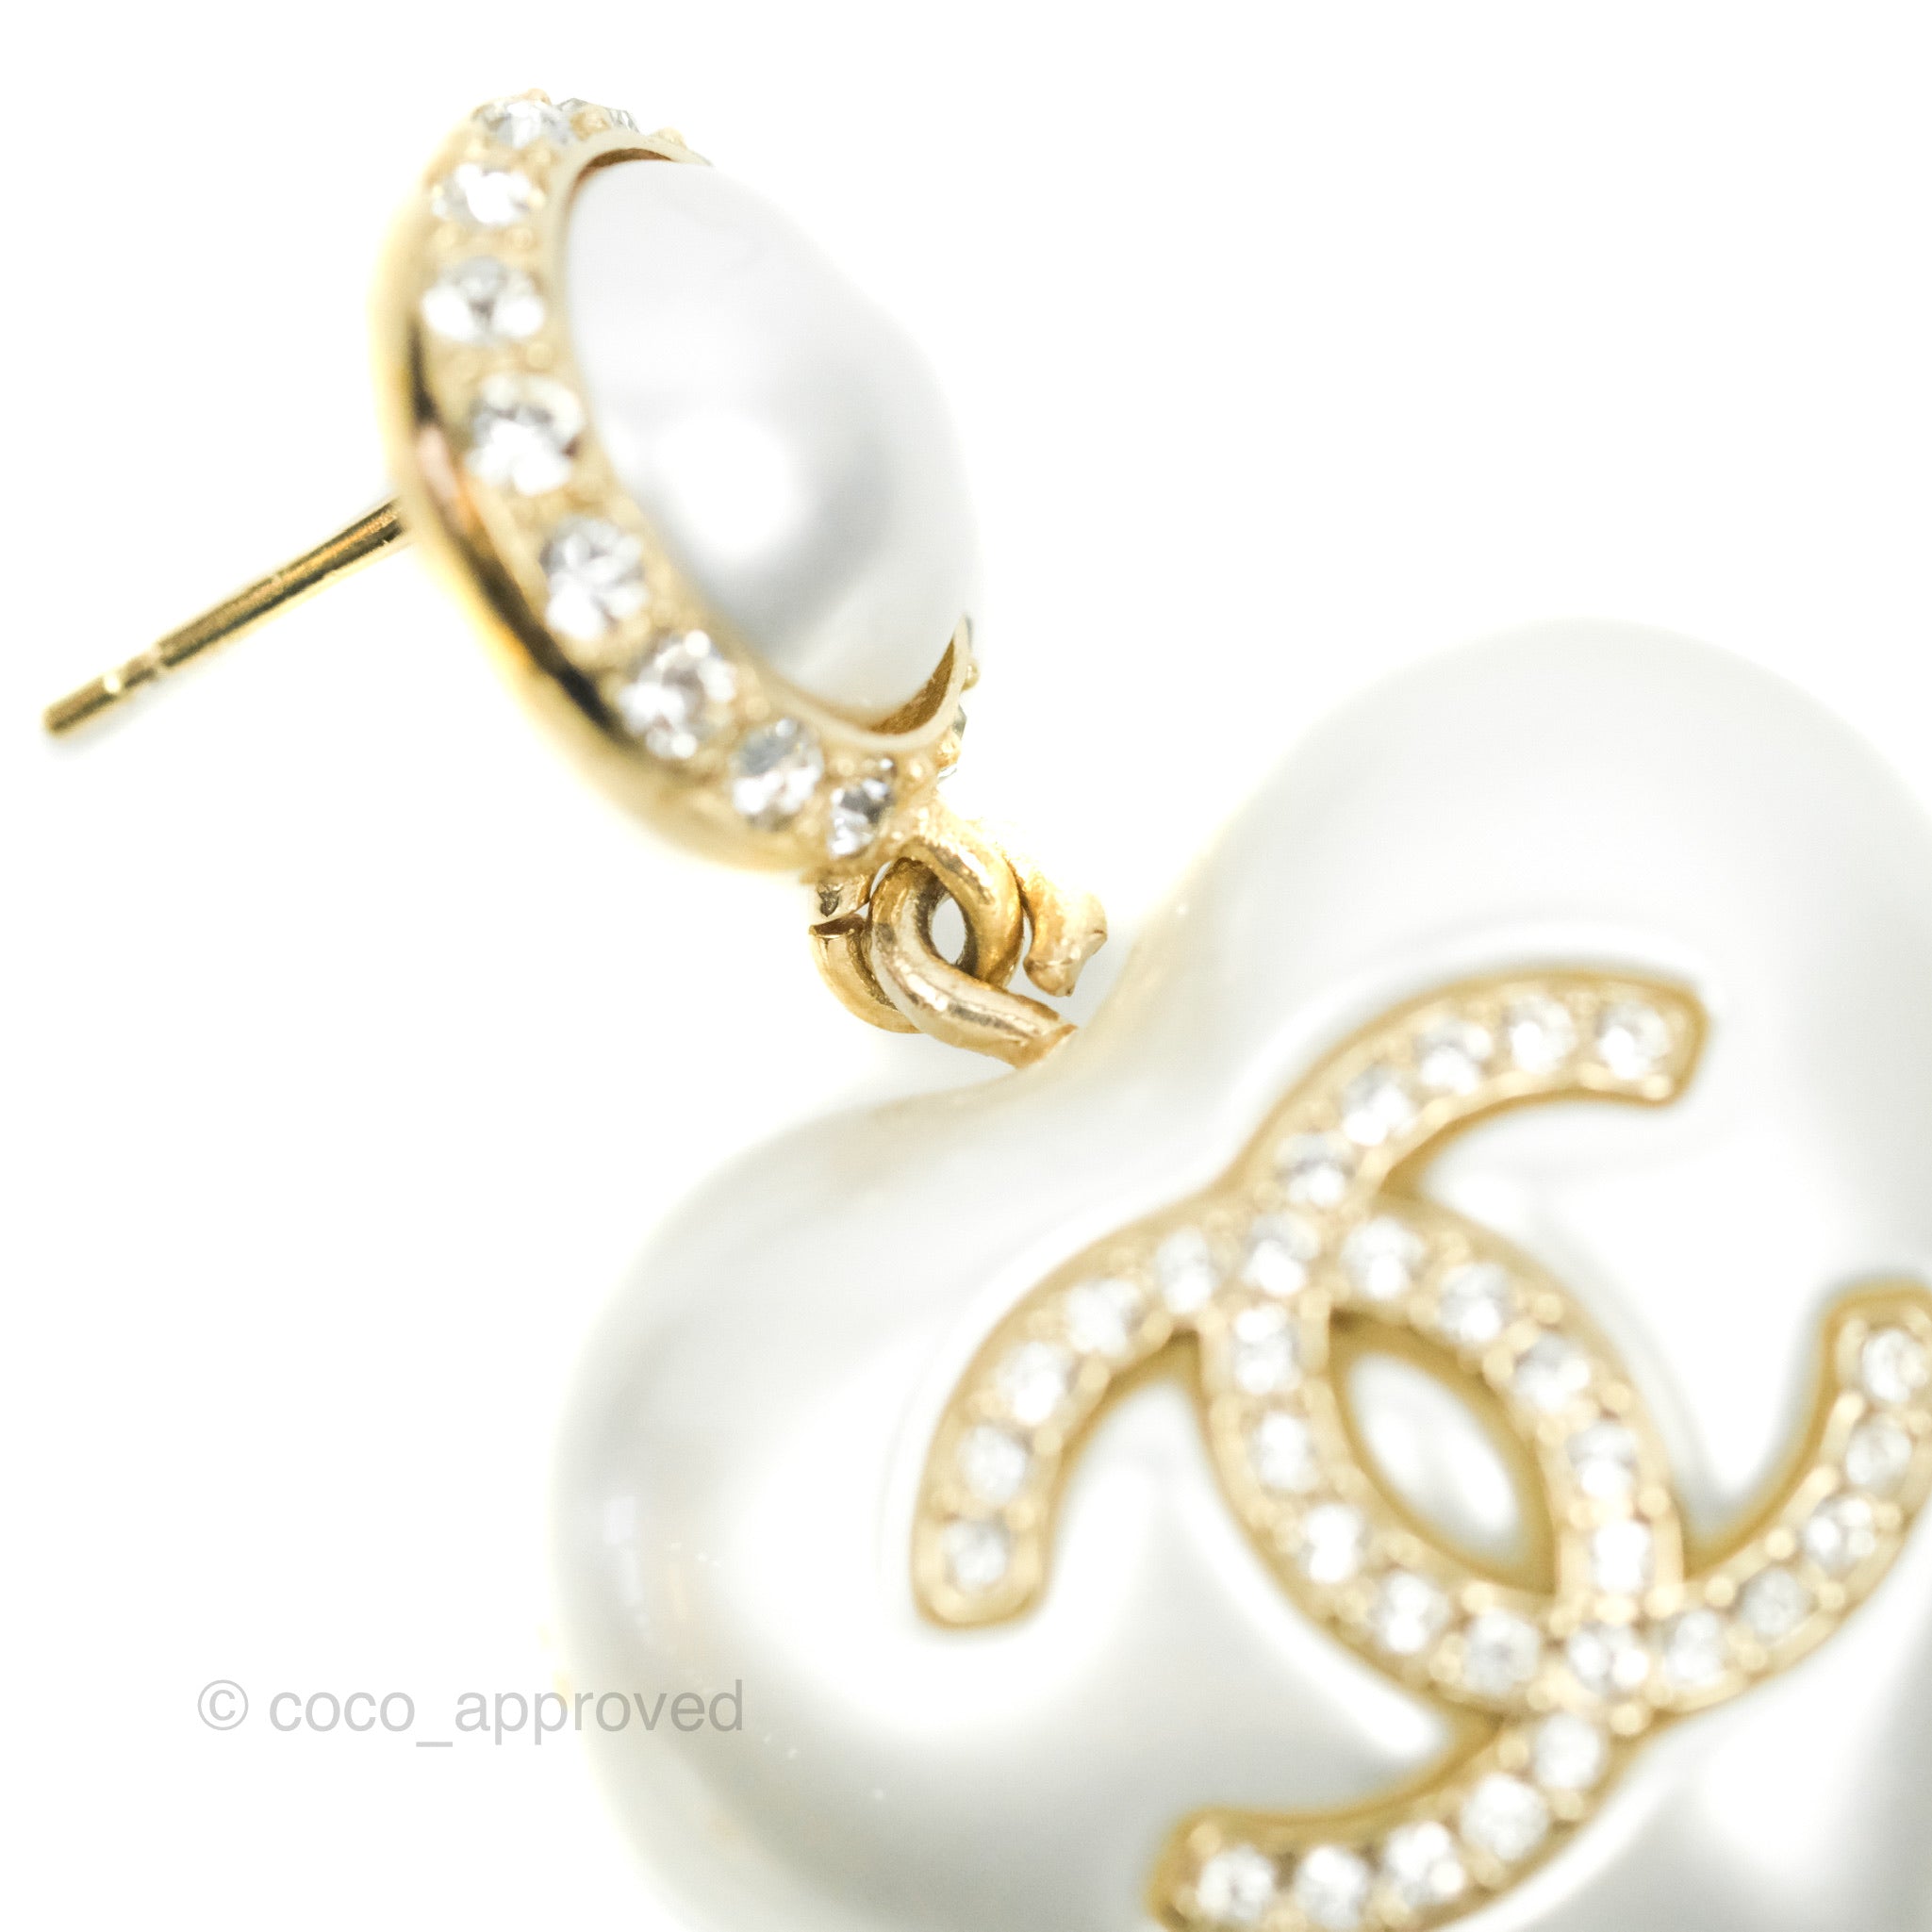 CHANEL Pearl Crystal CC Tweed Drop Earrings Gold Pink Pearly White 1147679